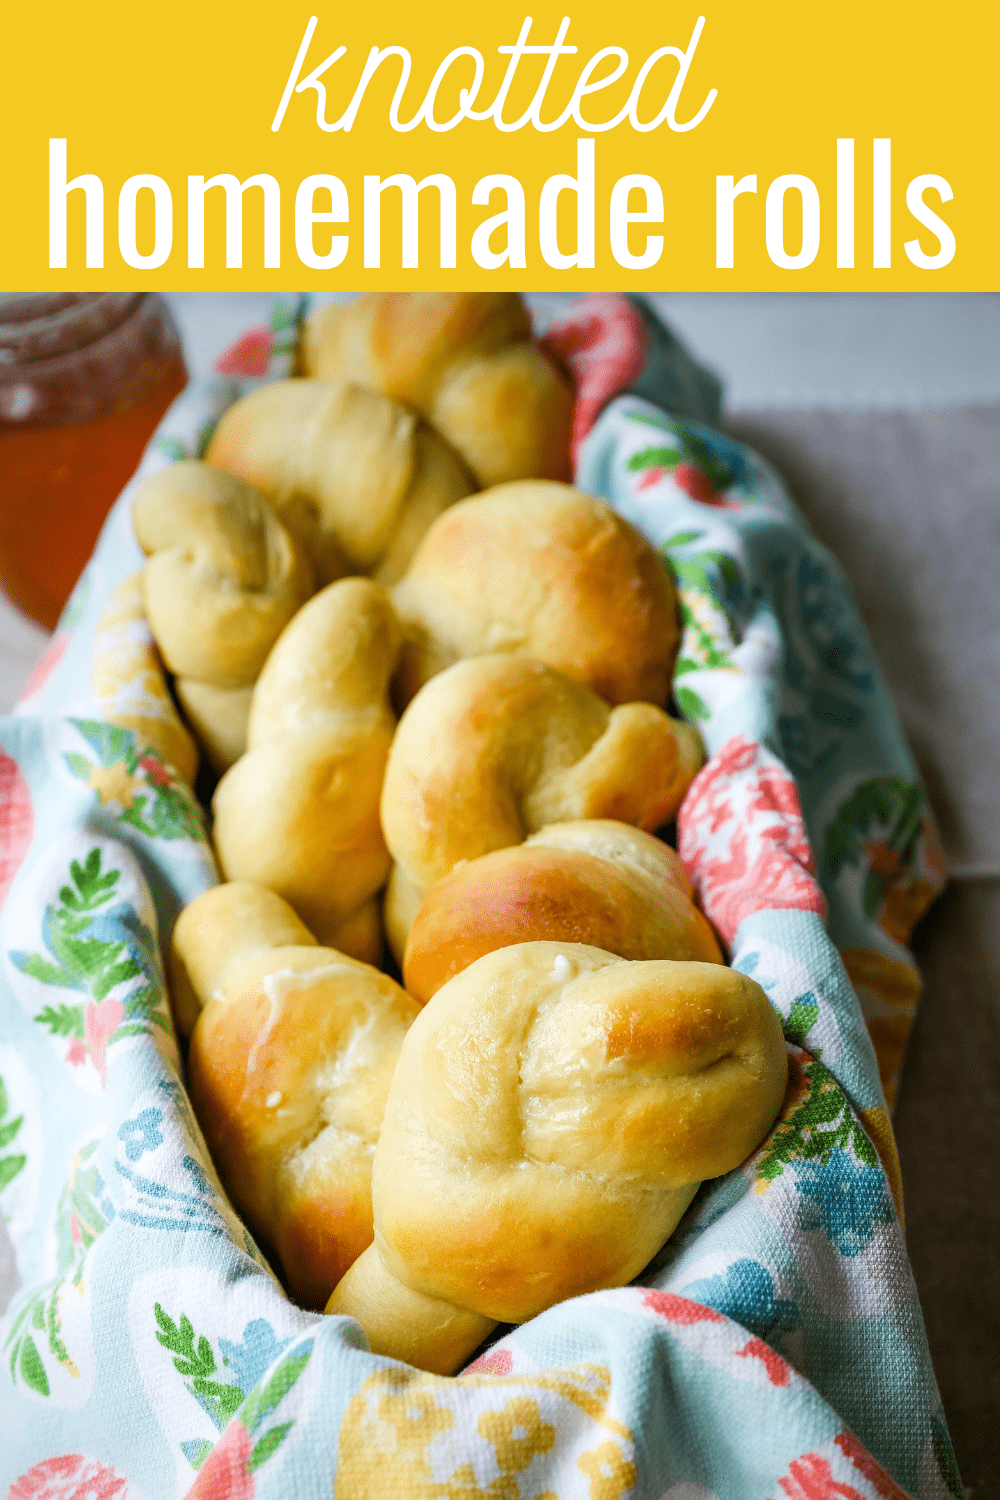 Homemade Knotted Rolls Buttery, fluffy homemade rolls tied in knot and brushed with butter. The perfect knotted rolls recipe! www.modernhoney.com #rolls #easter #dinnerrolls #knottedrolls